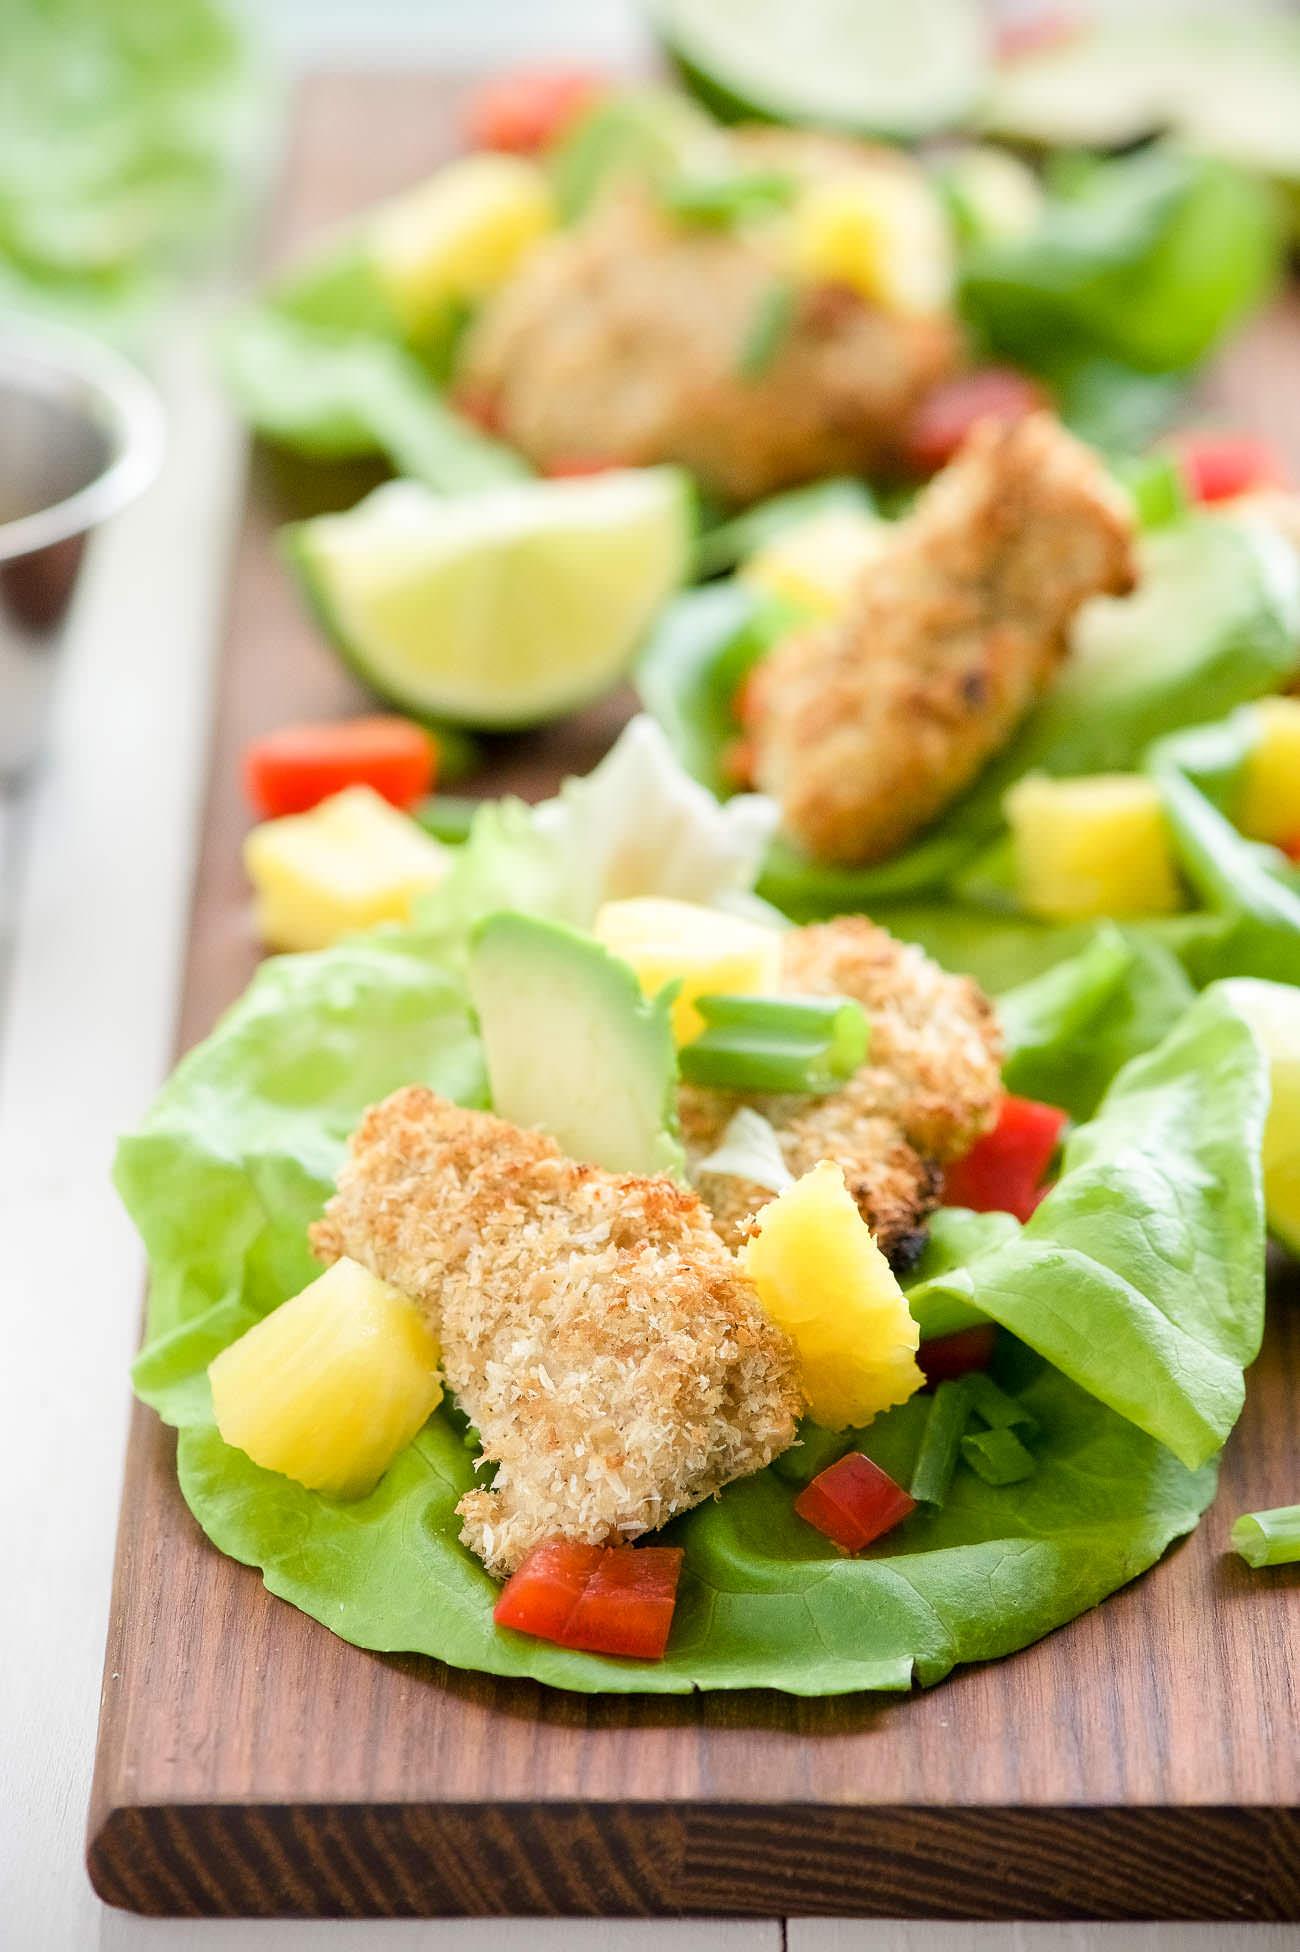 Cashew Coconut Crusted Chicken Lettuce Wraps are our new favorite hand held dinner! Every bite of chicken is encrusted in crunchy cashews and coconut then drizzled with a sweet and spicy Ancho Honey Mustard Sauce!